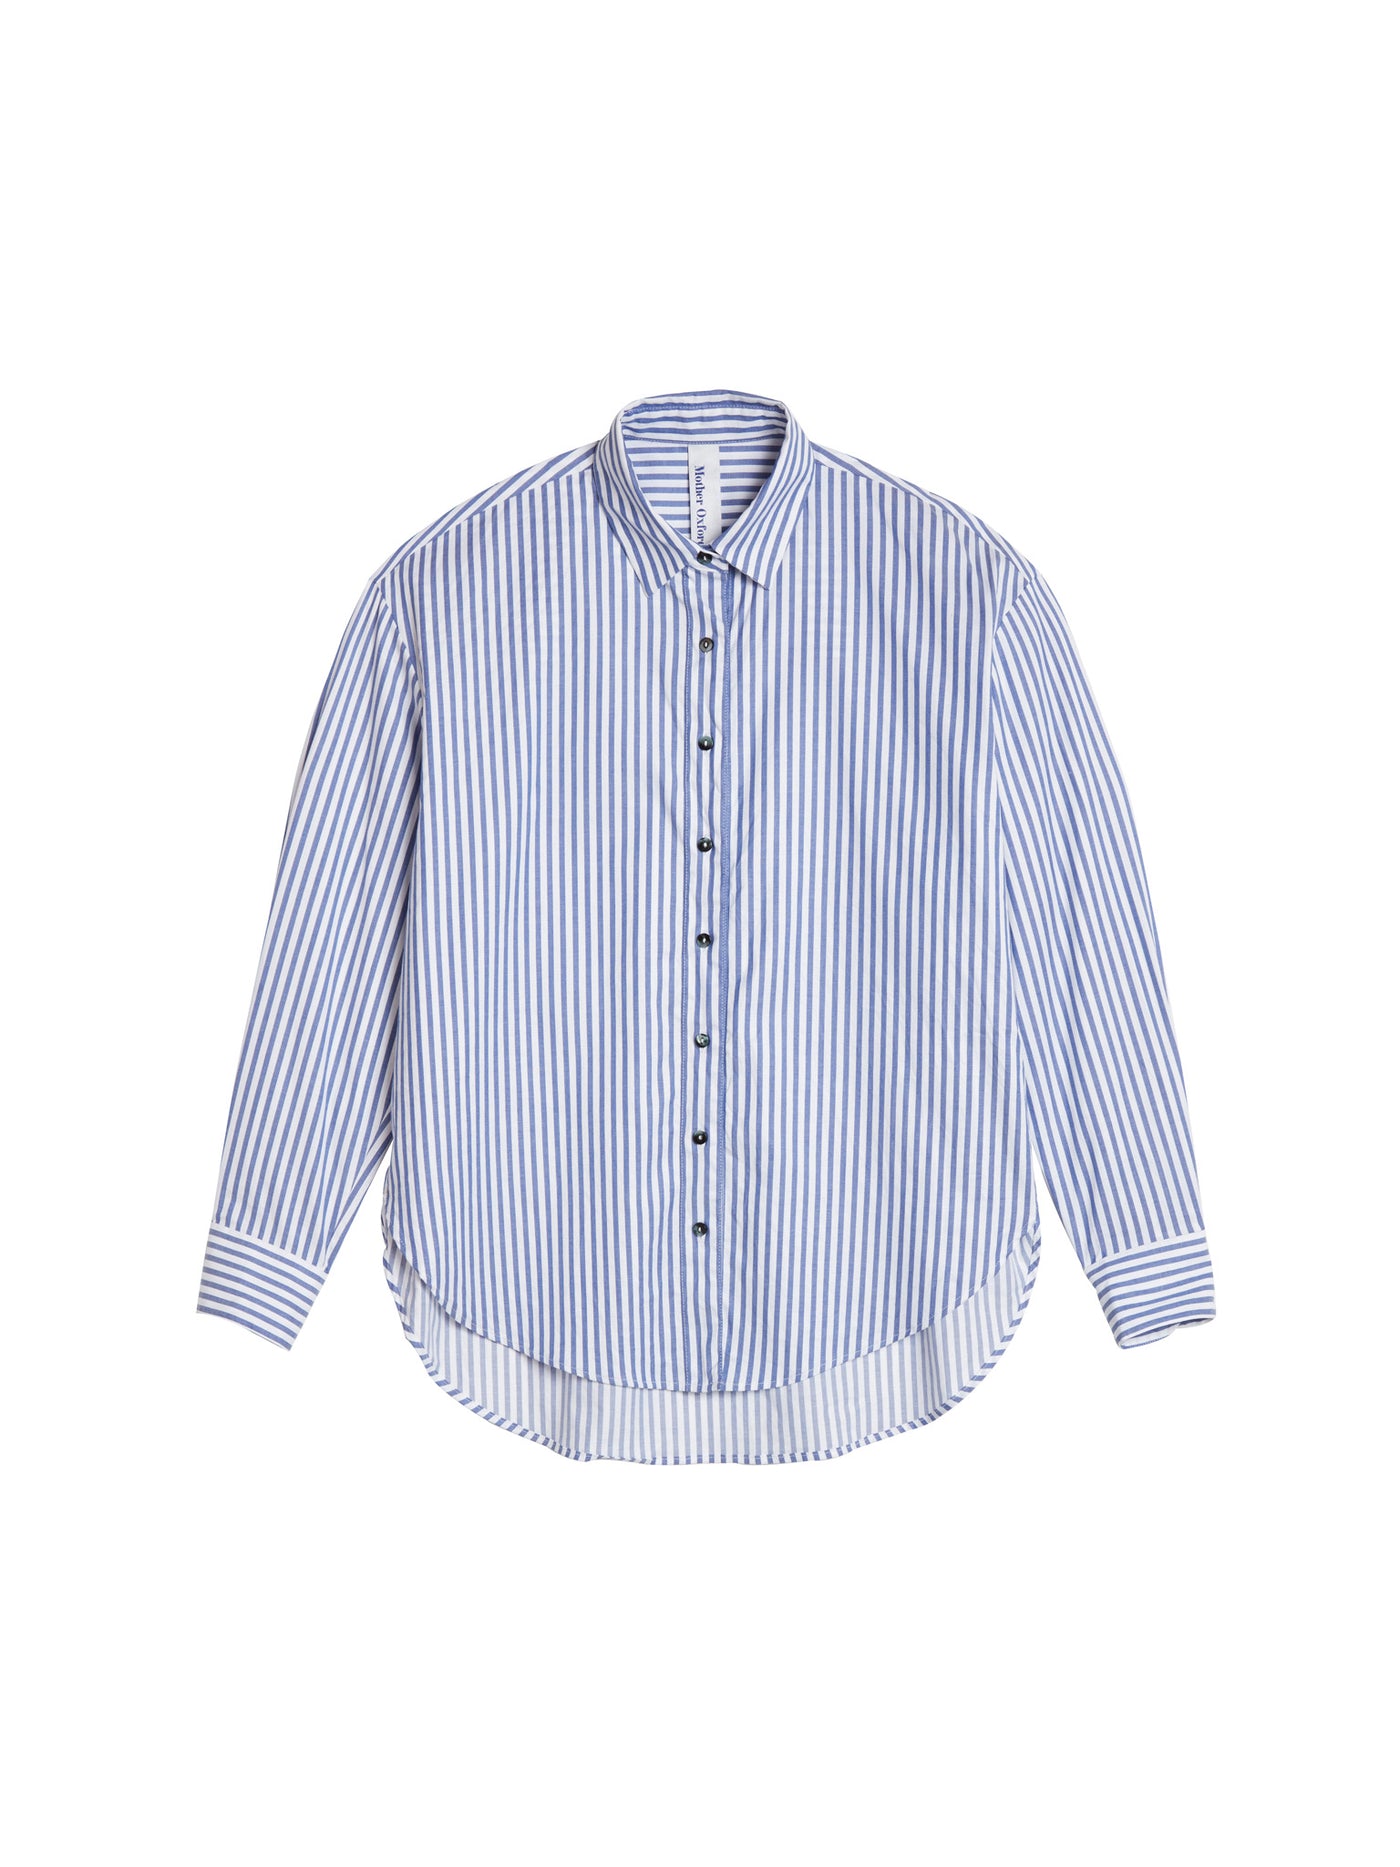 Mother Oxford Performance Button Up White Oxford Shirt for Moms